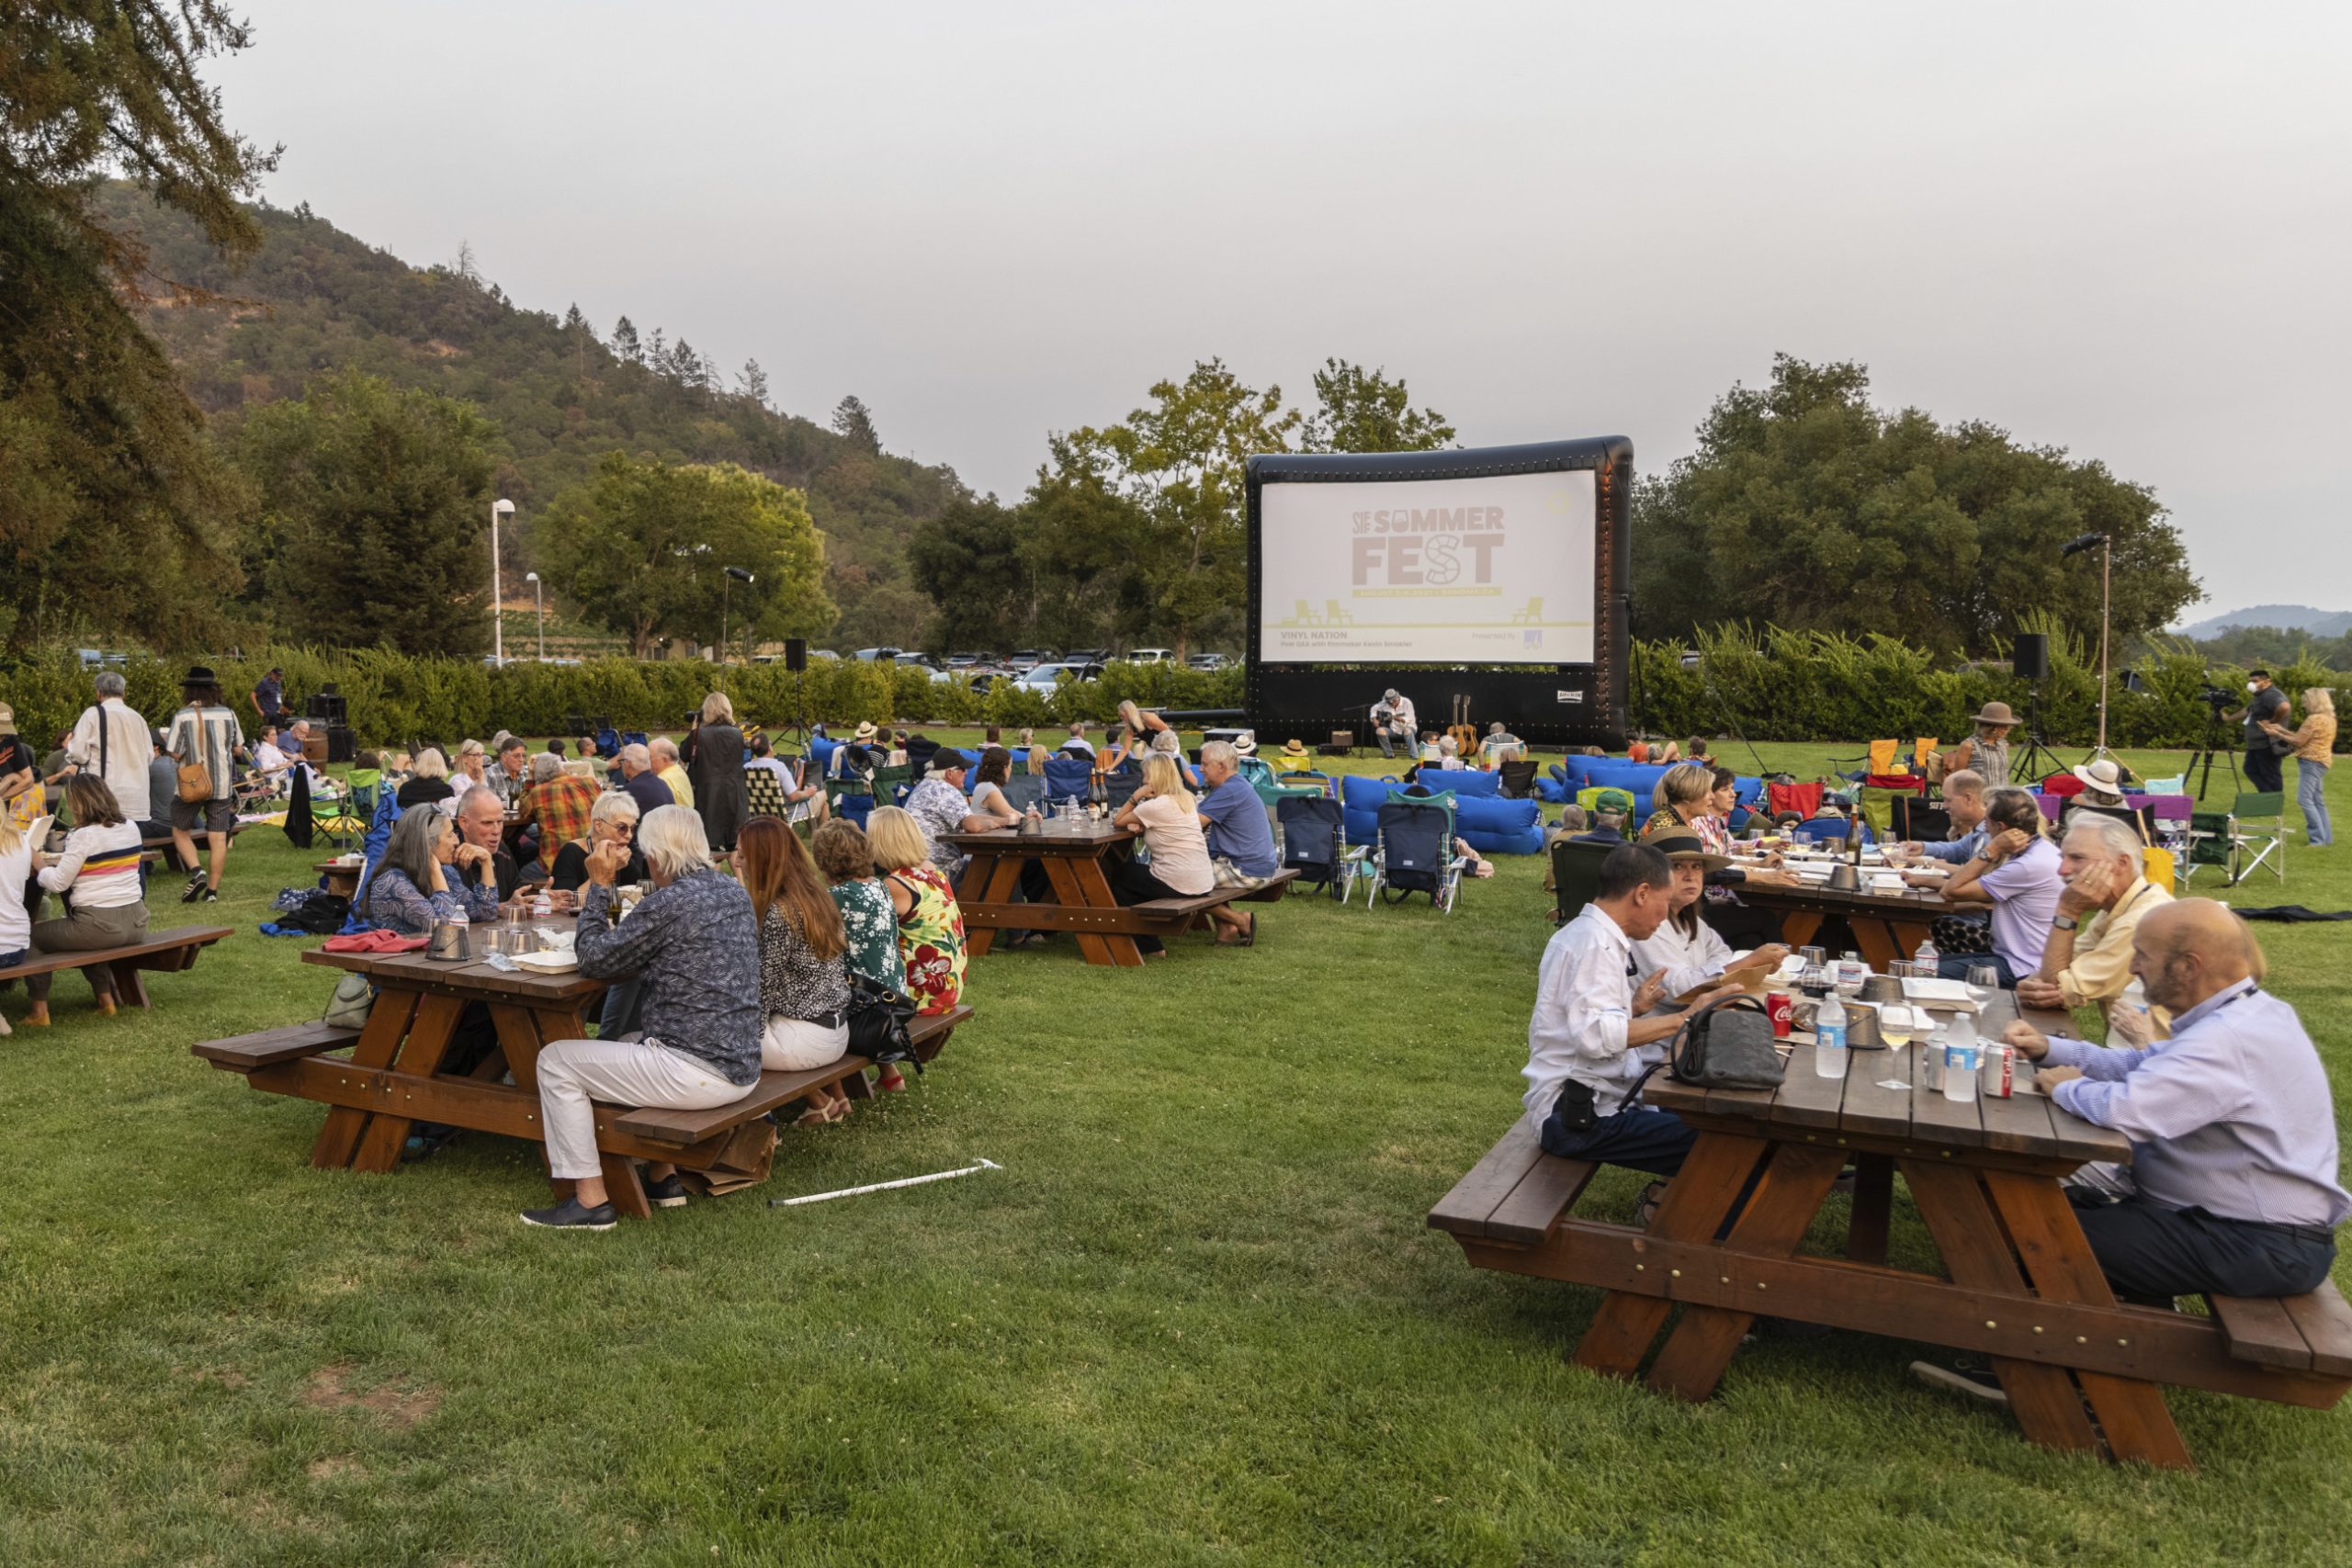 FunFlicks® inflatable movie screen at the Napa Summer Fest